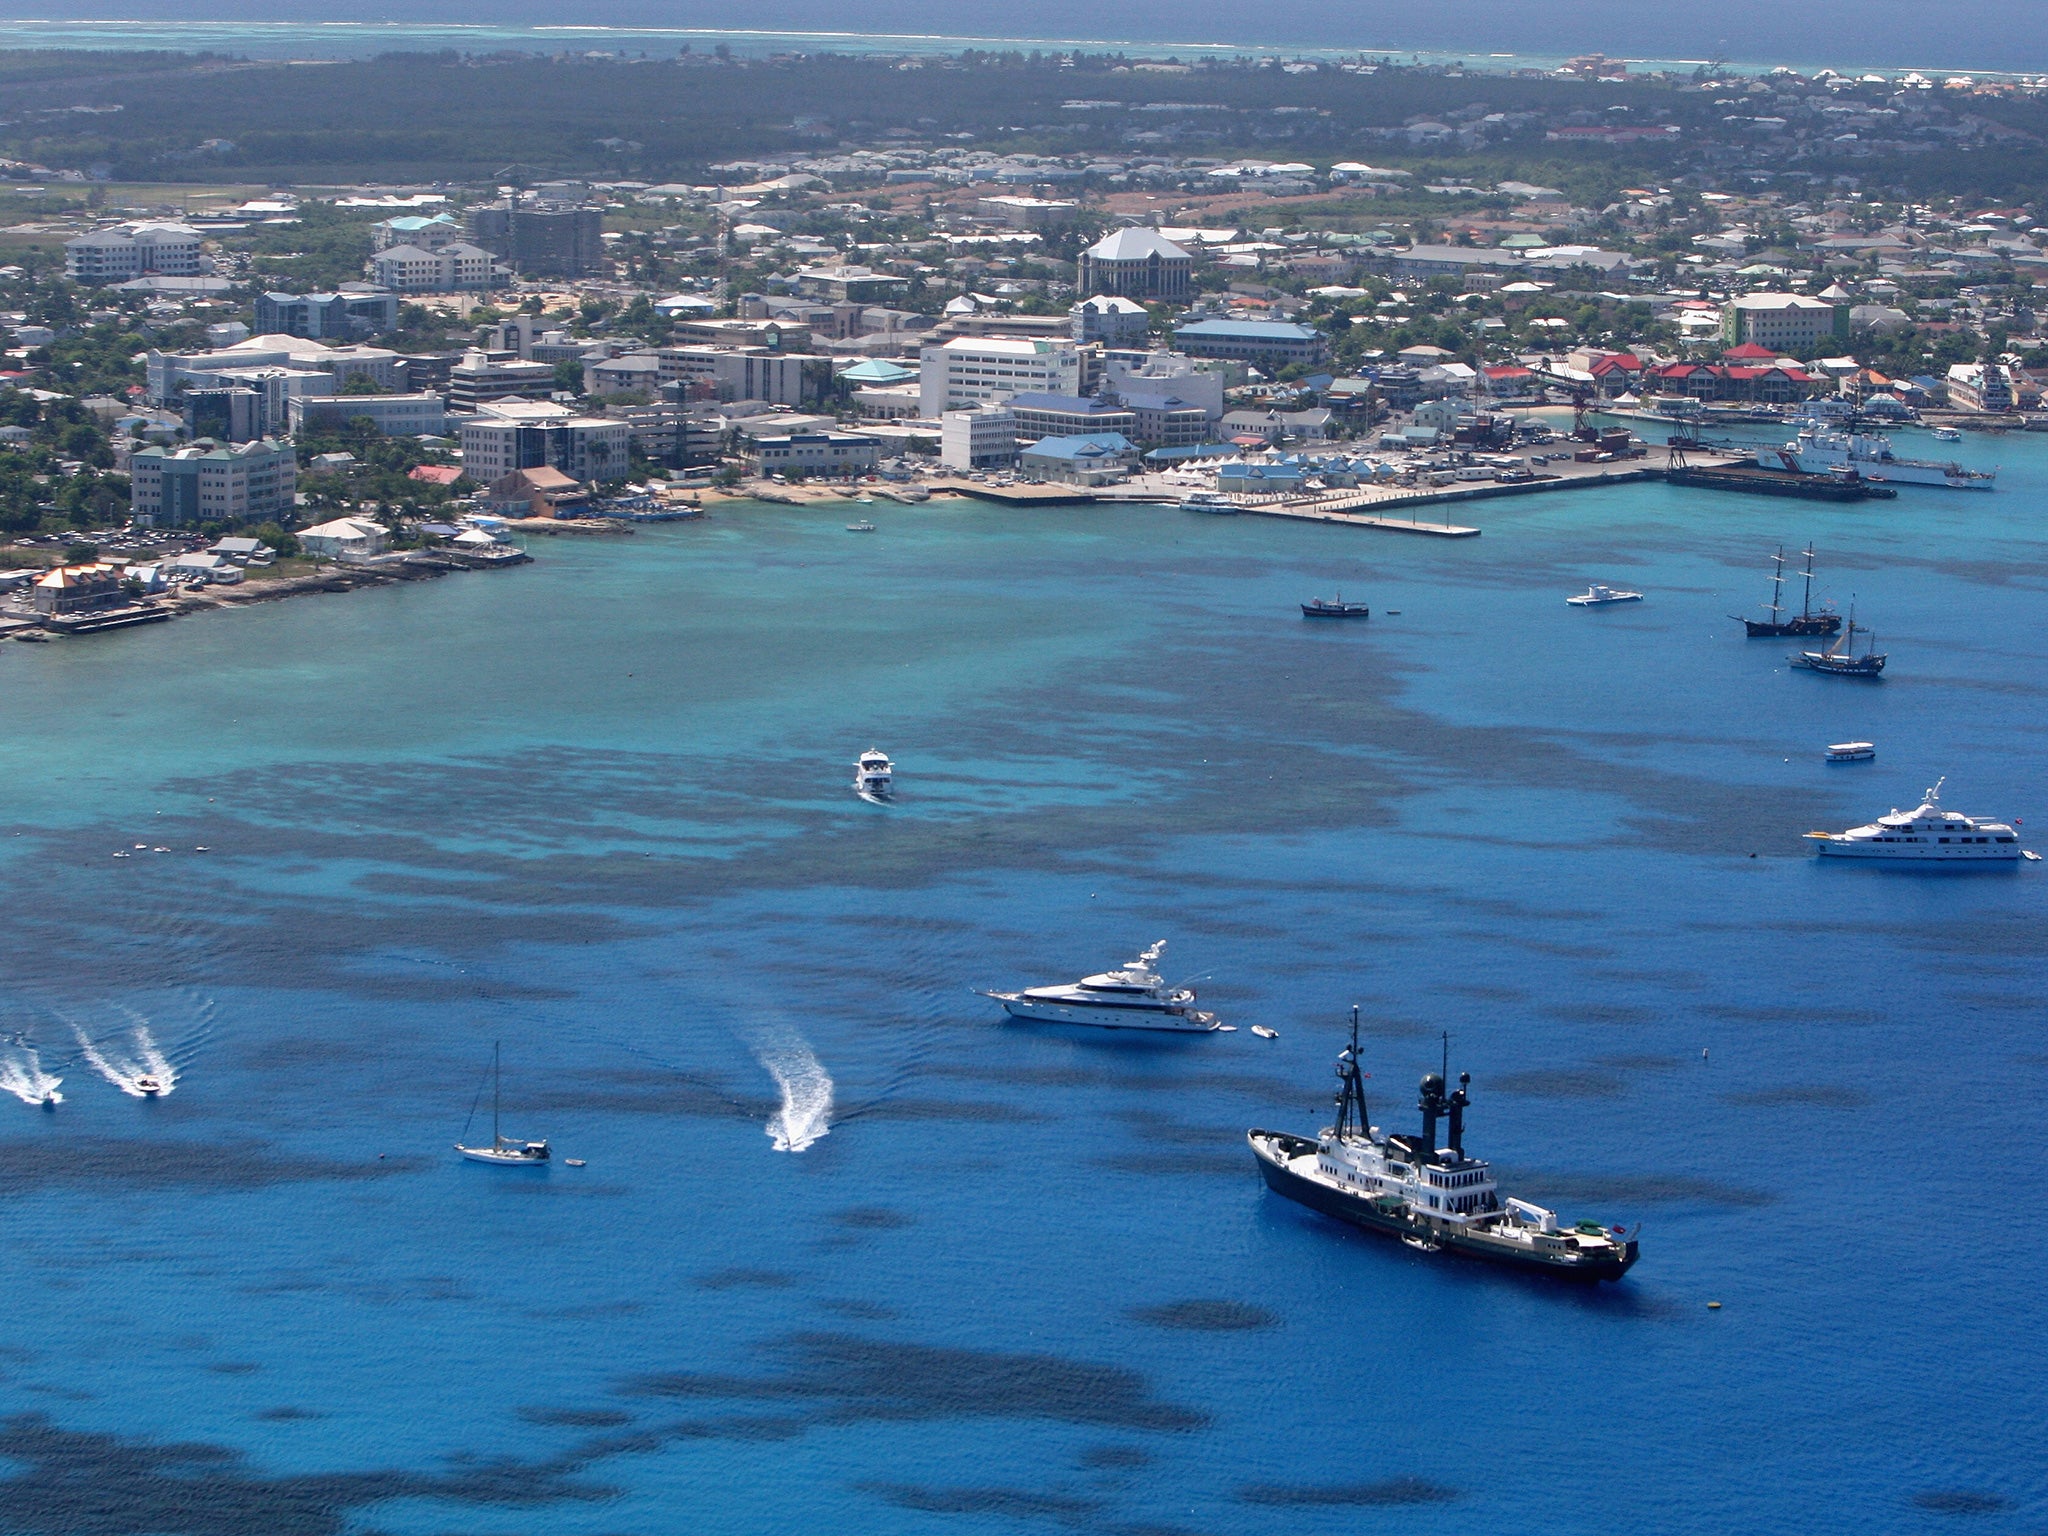 Both the Cayman Islands (pictured) and the British Virgin Islands are British Overseas Territories are excluded from the main list